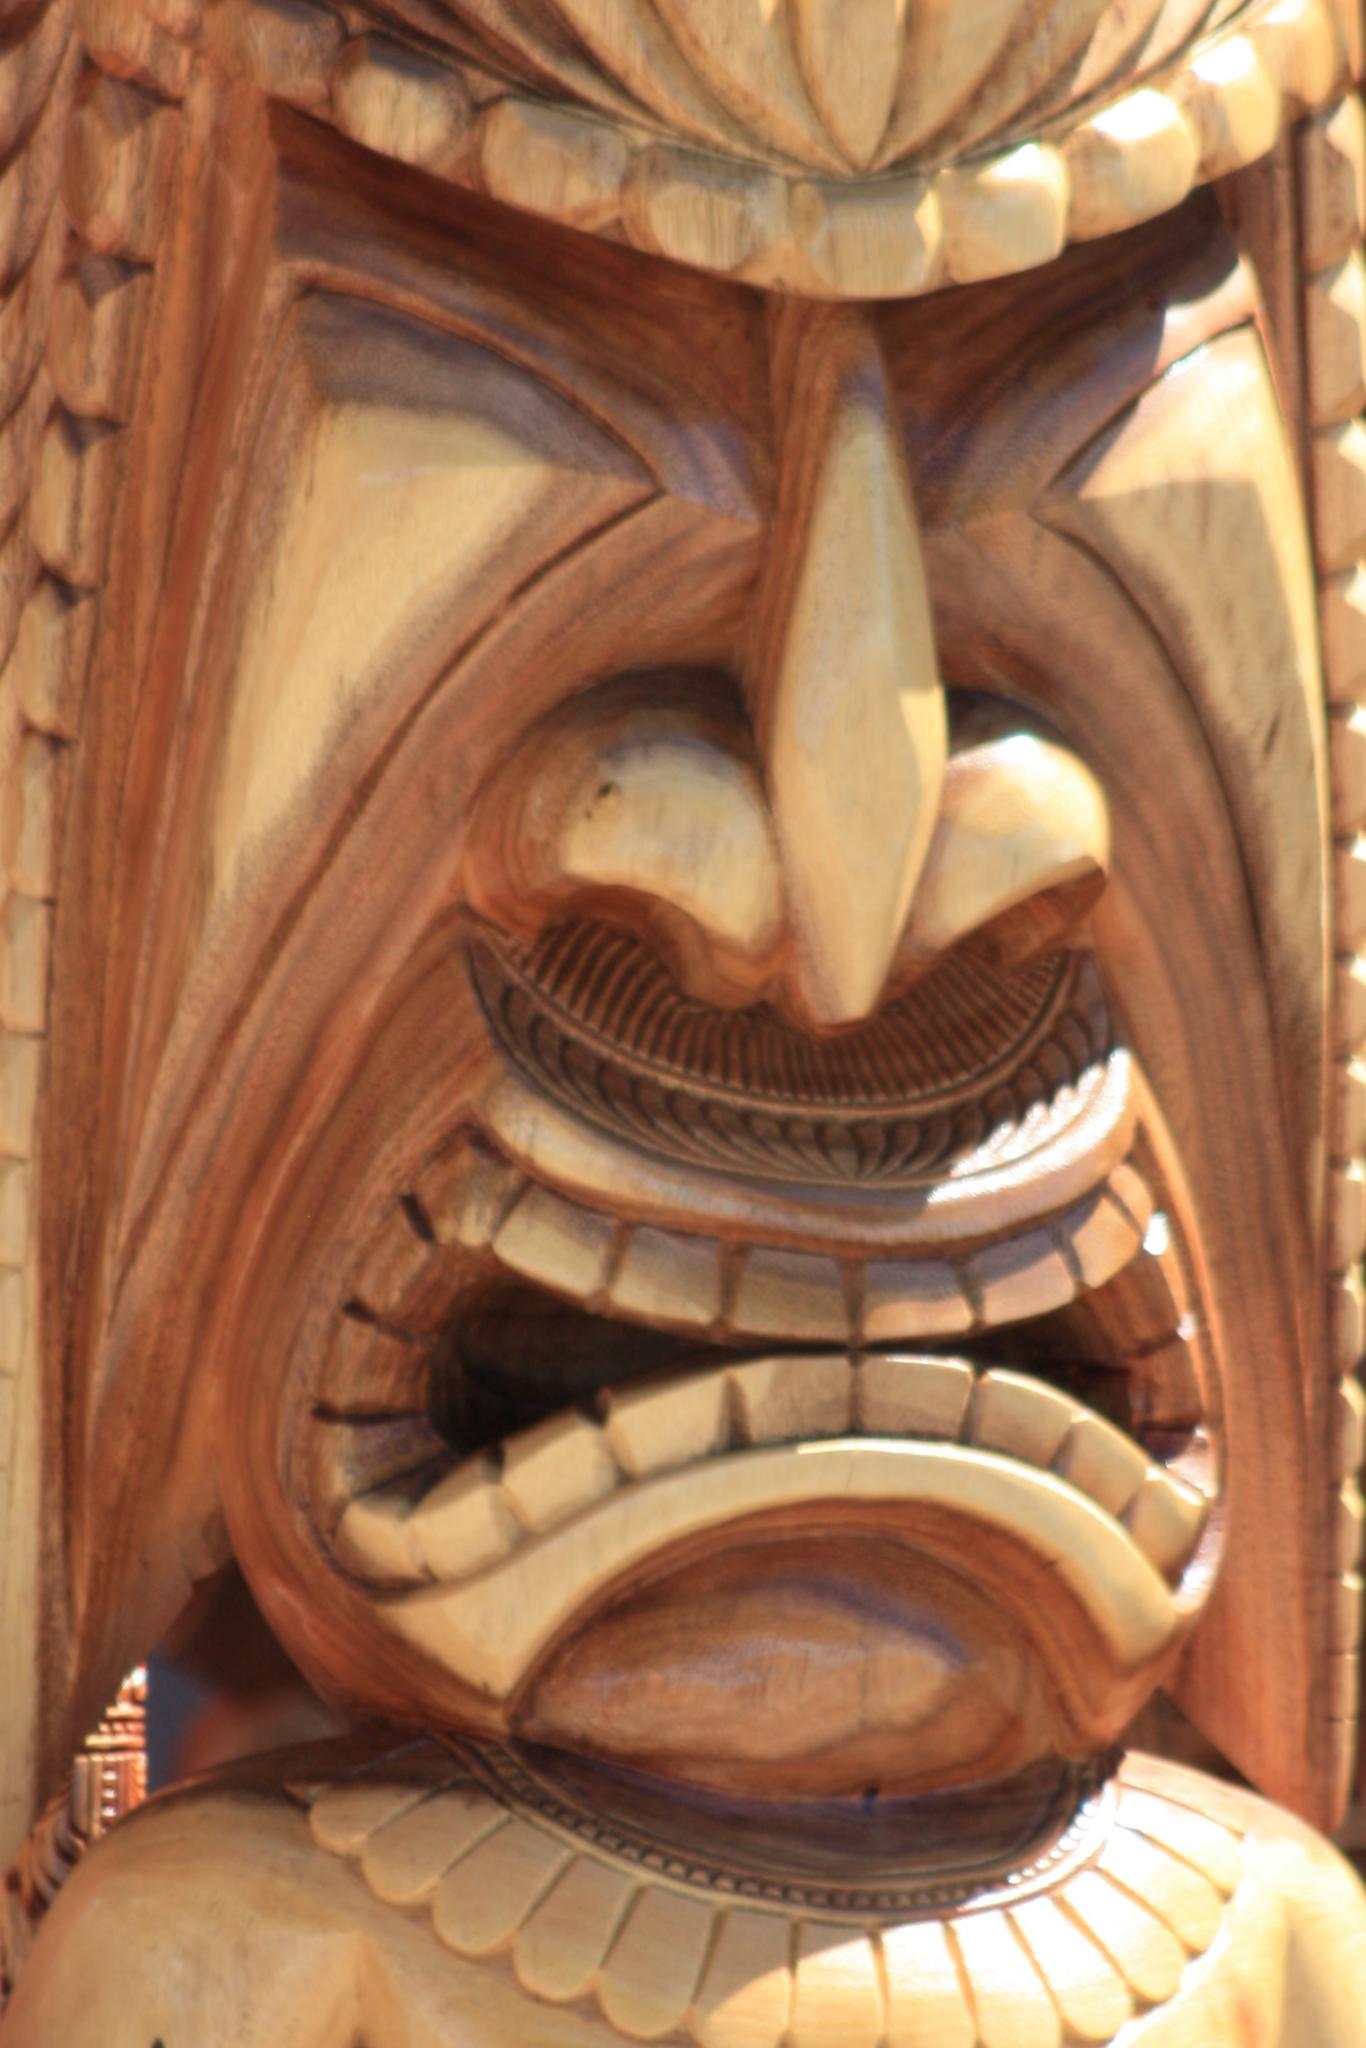 a large face carved on the side of a wood piece